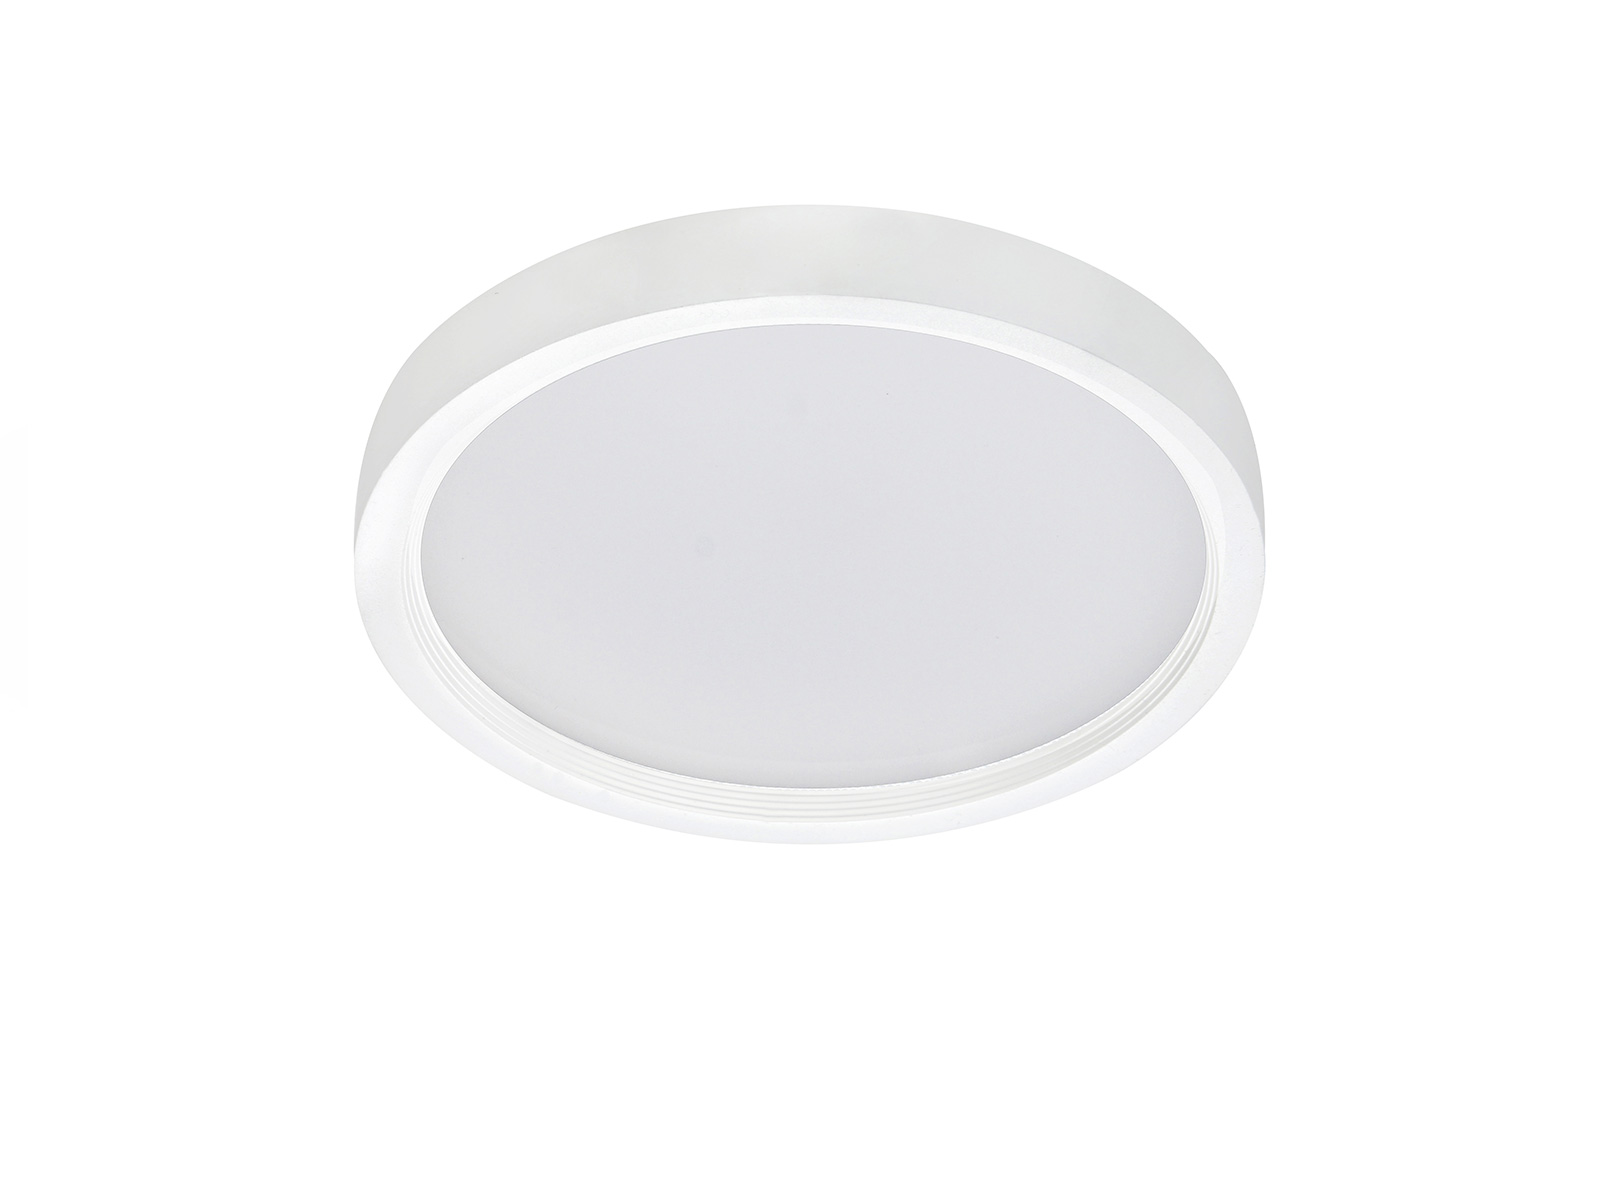 DL100A Ultra-thin Design Surface mounted LED downlight